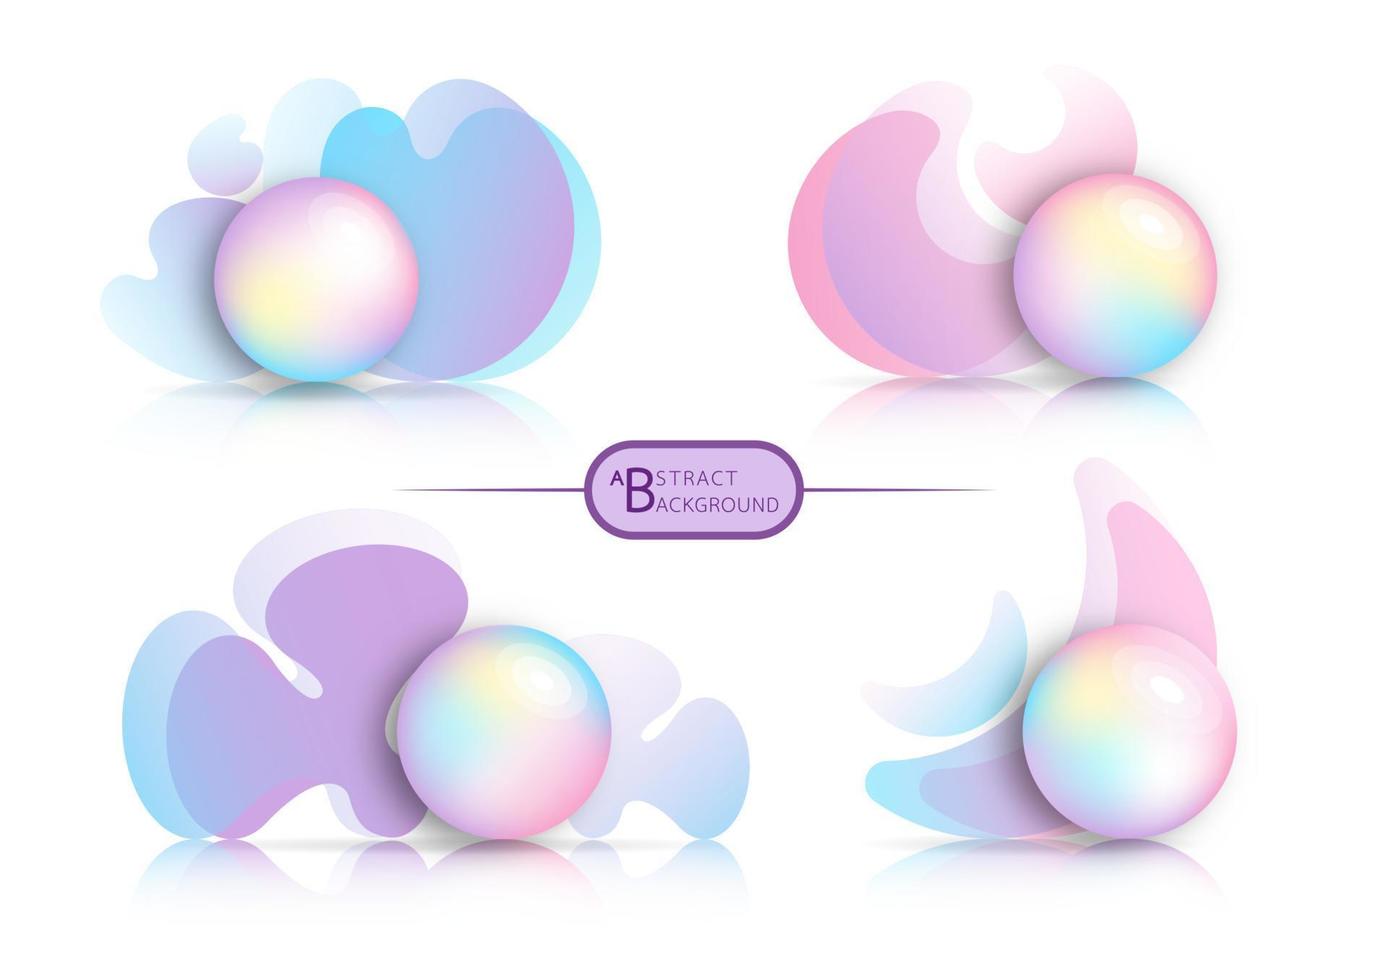 Abstract Background group rainbow colored balls with flat shapes and wavy lines vector illustration